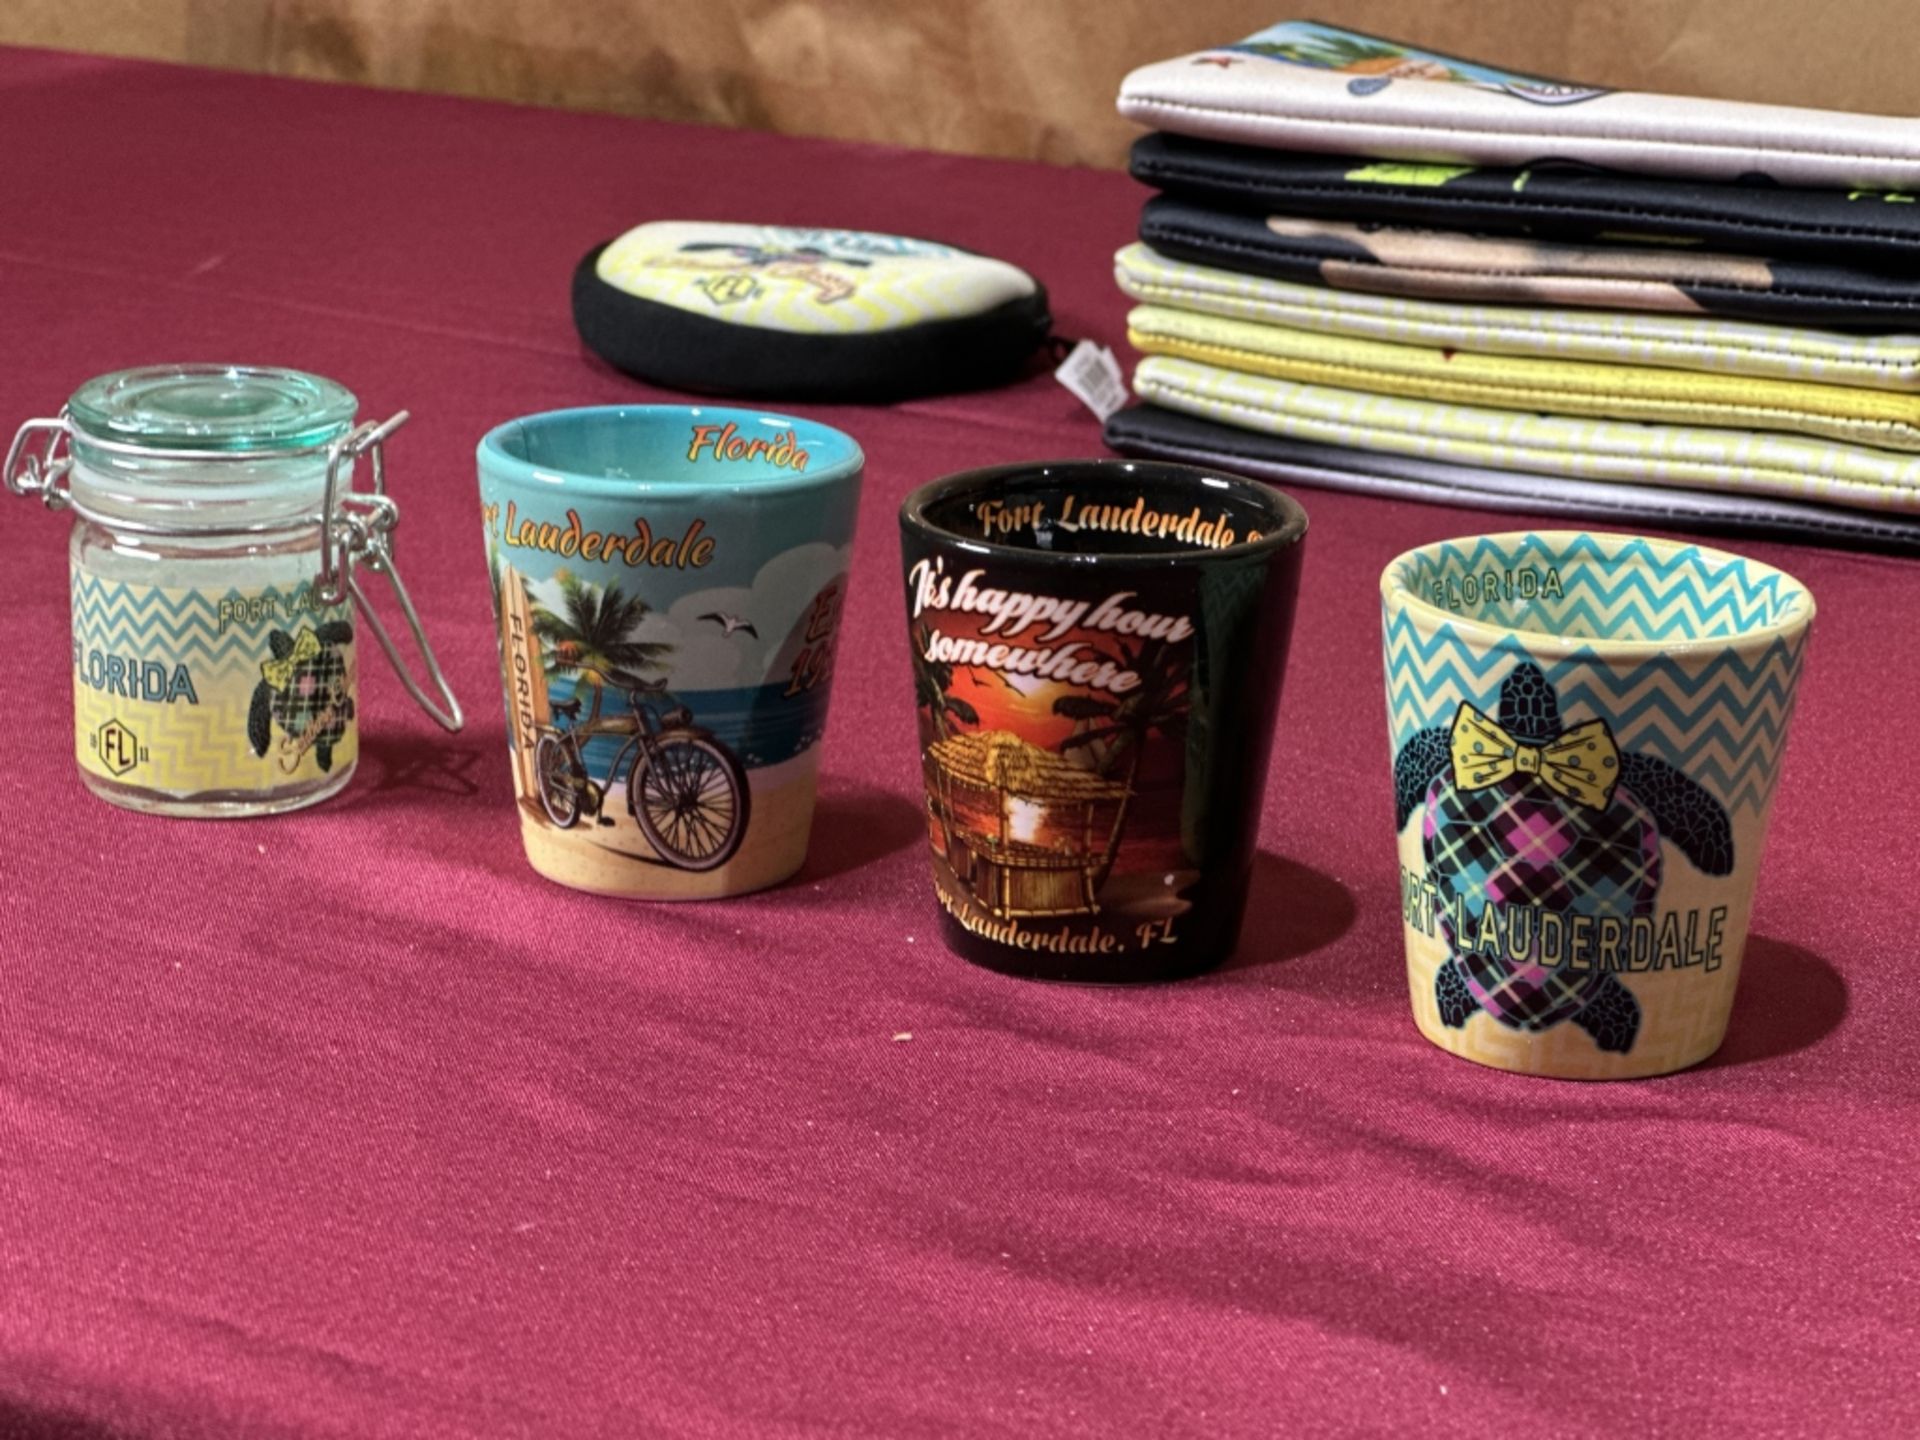 LOT CONSISTING OF ASSORTED BEACH-THEMED SOUVENIRS - Image 5 of 9